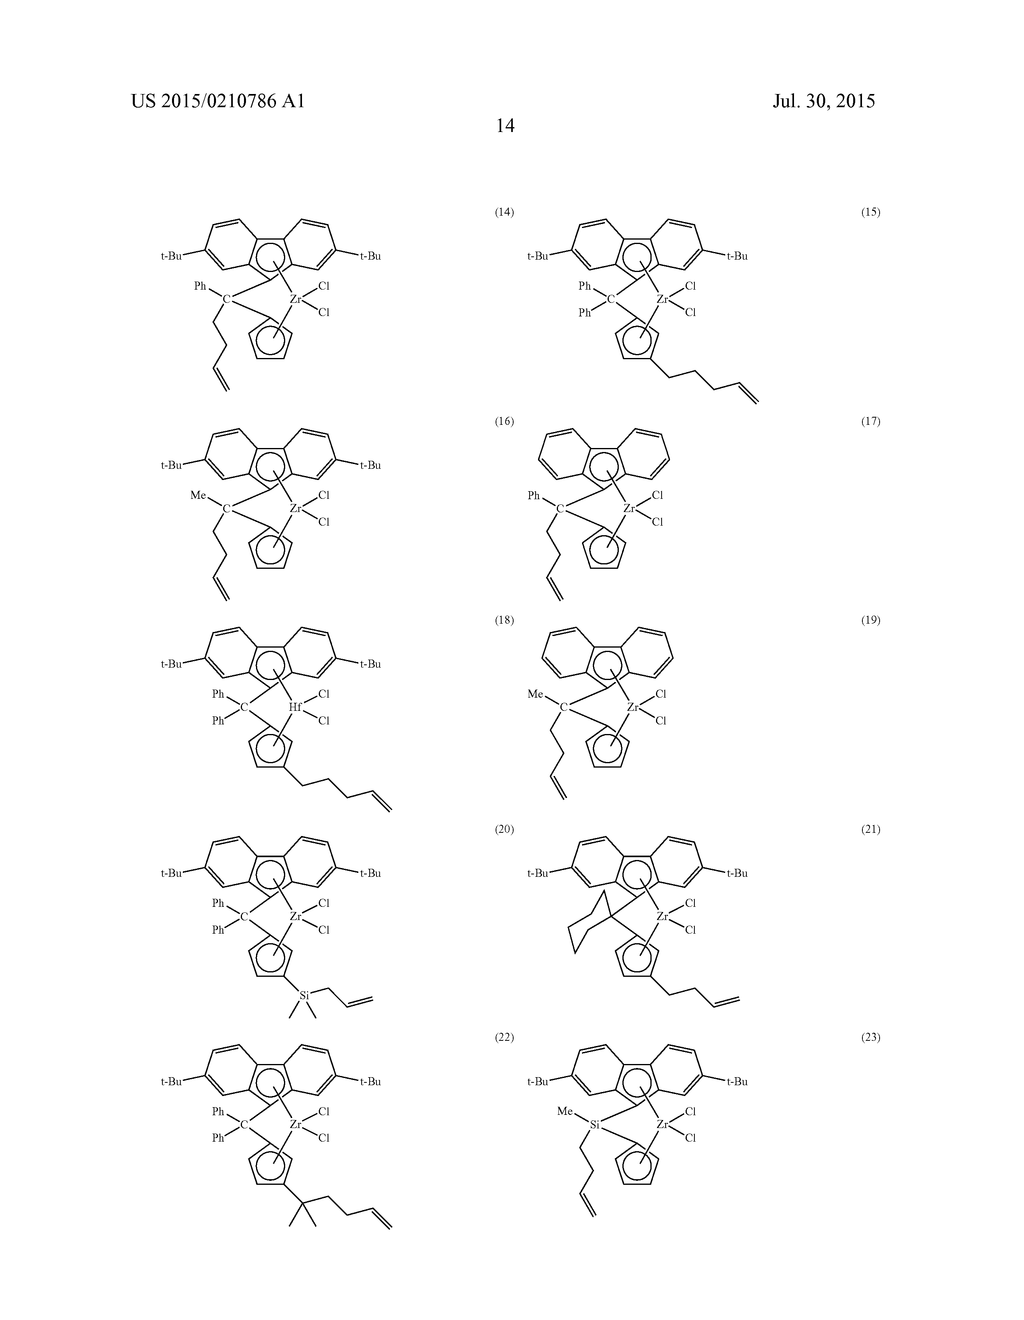 Novel Polymer Compositions and Methods of Making and Using Same - diagram, schematic, and image 20